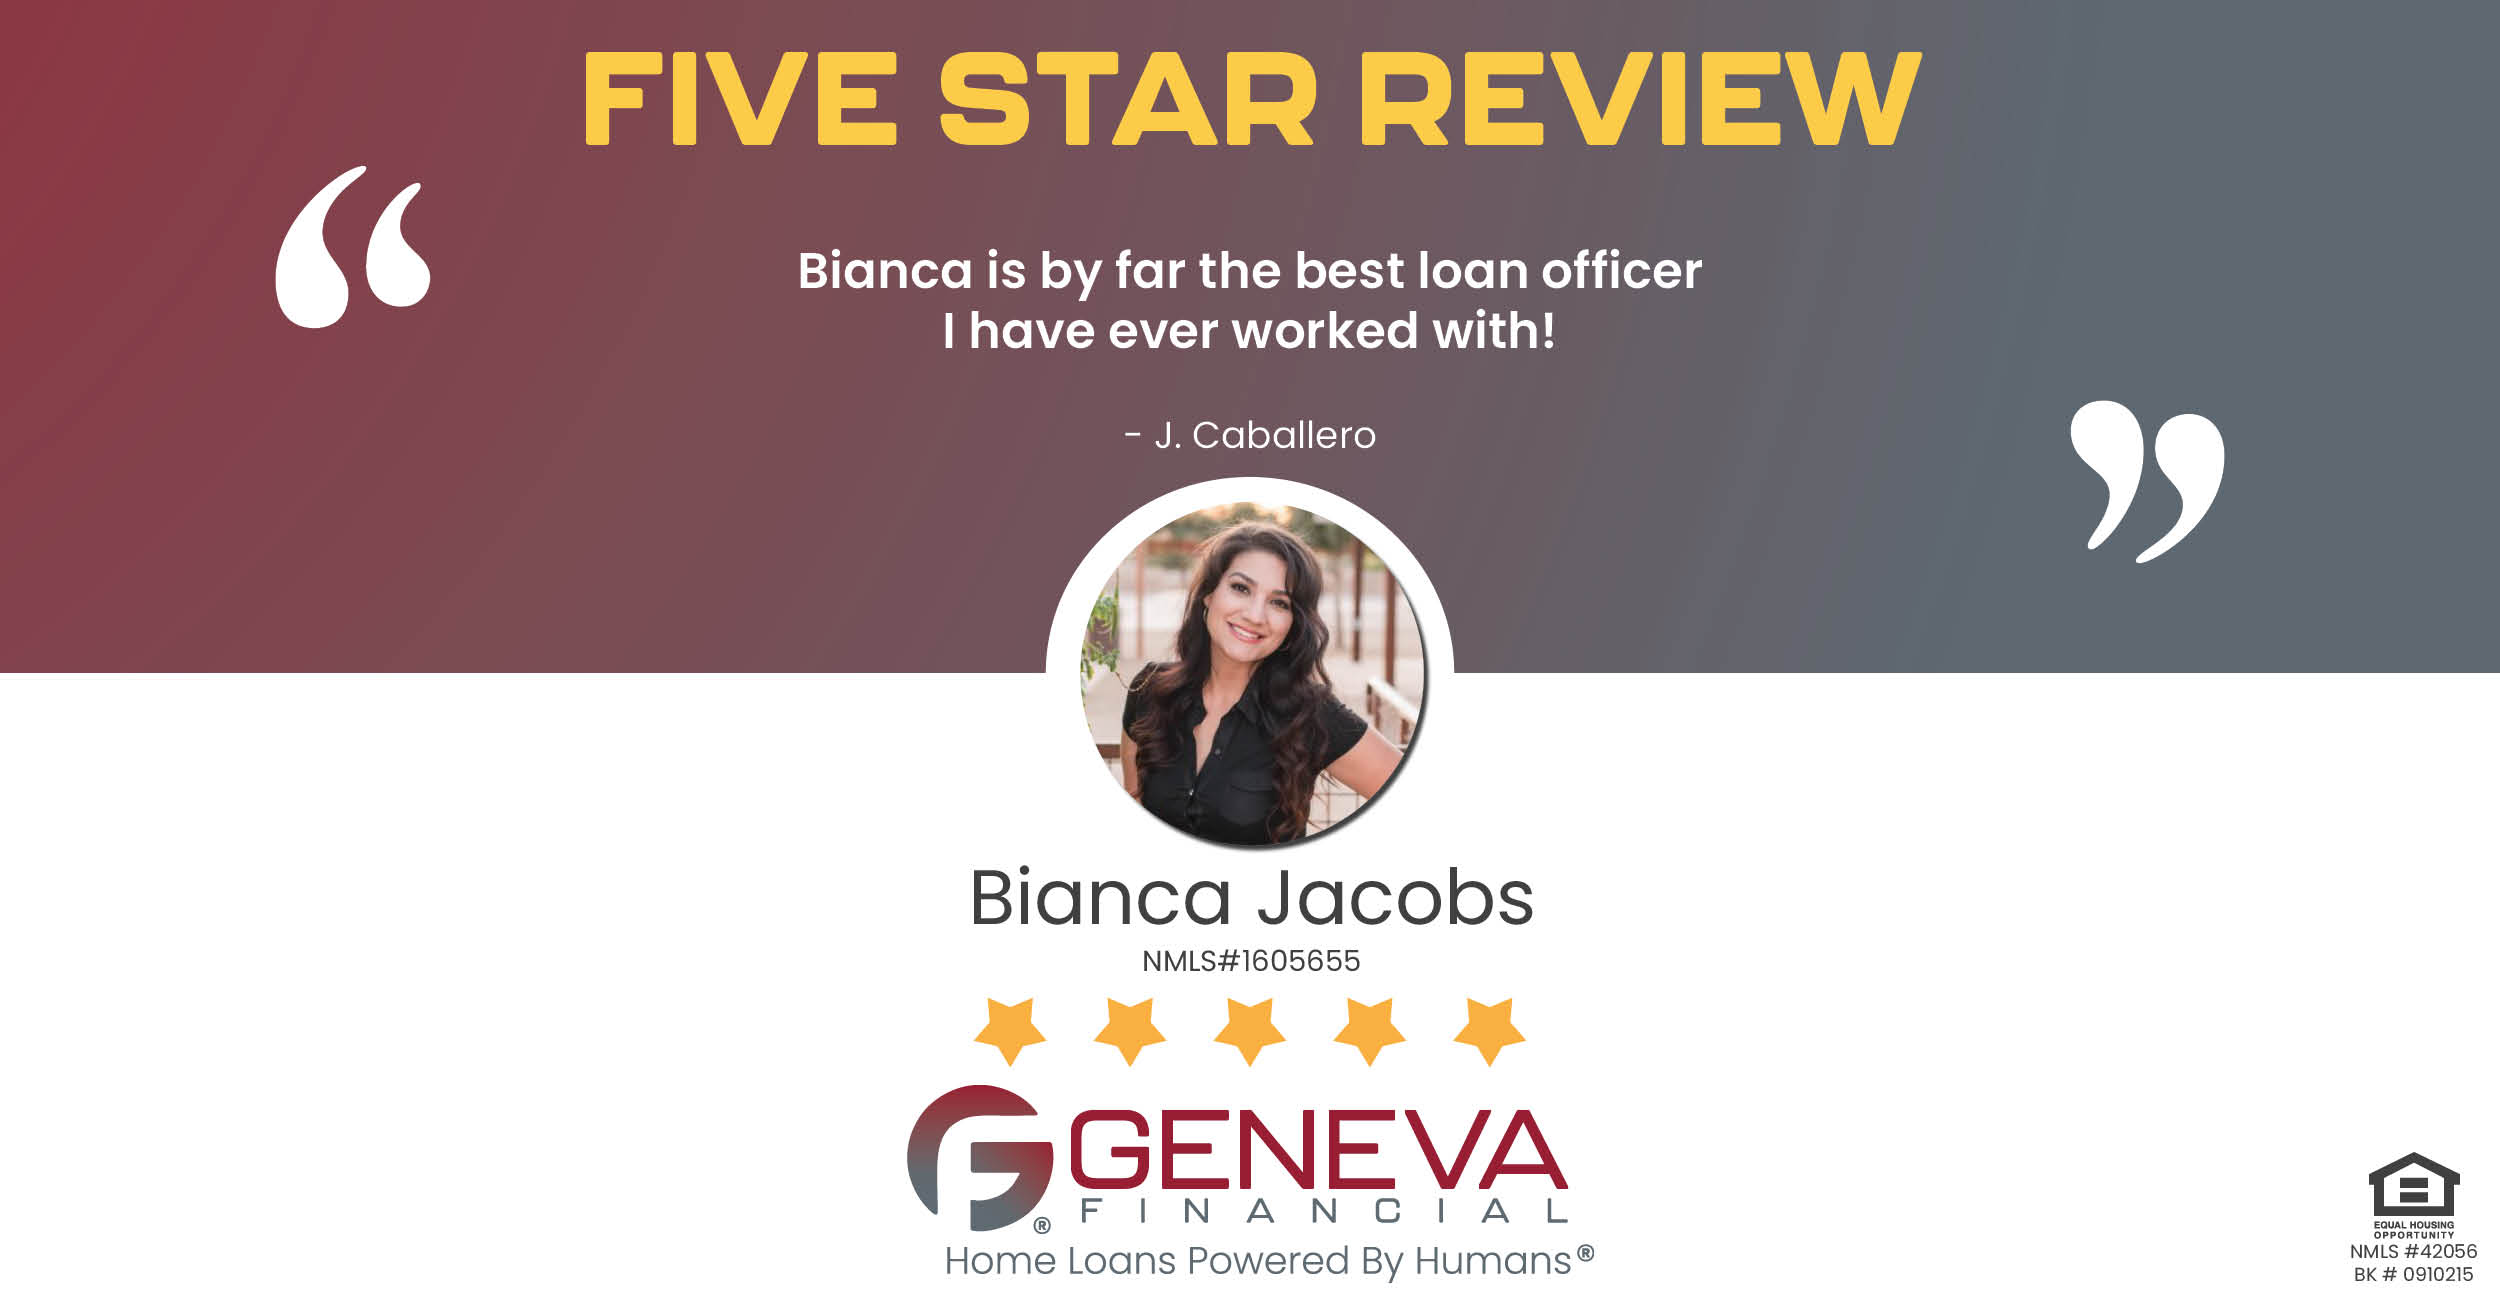 5 Star Review for Bianca Jacobs, Licensed Mortgage Loan Officer with Geneva Financial, Tucson, Arizona – Home Loans Powered by Humans®.